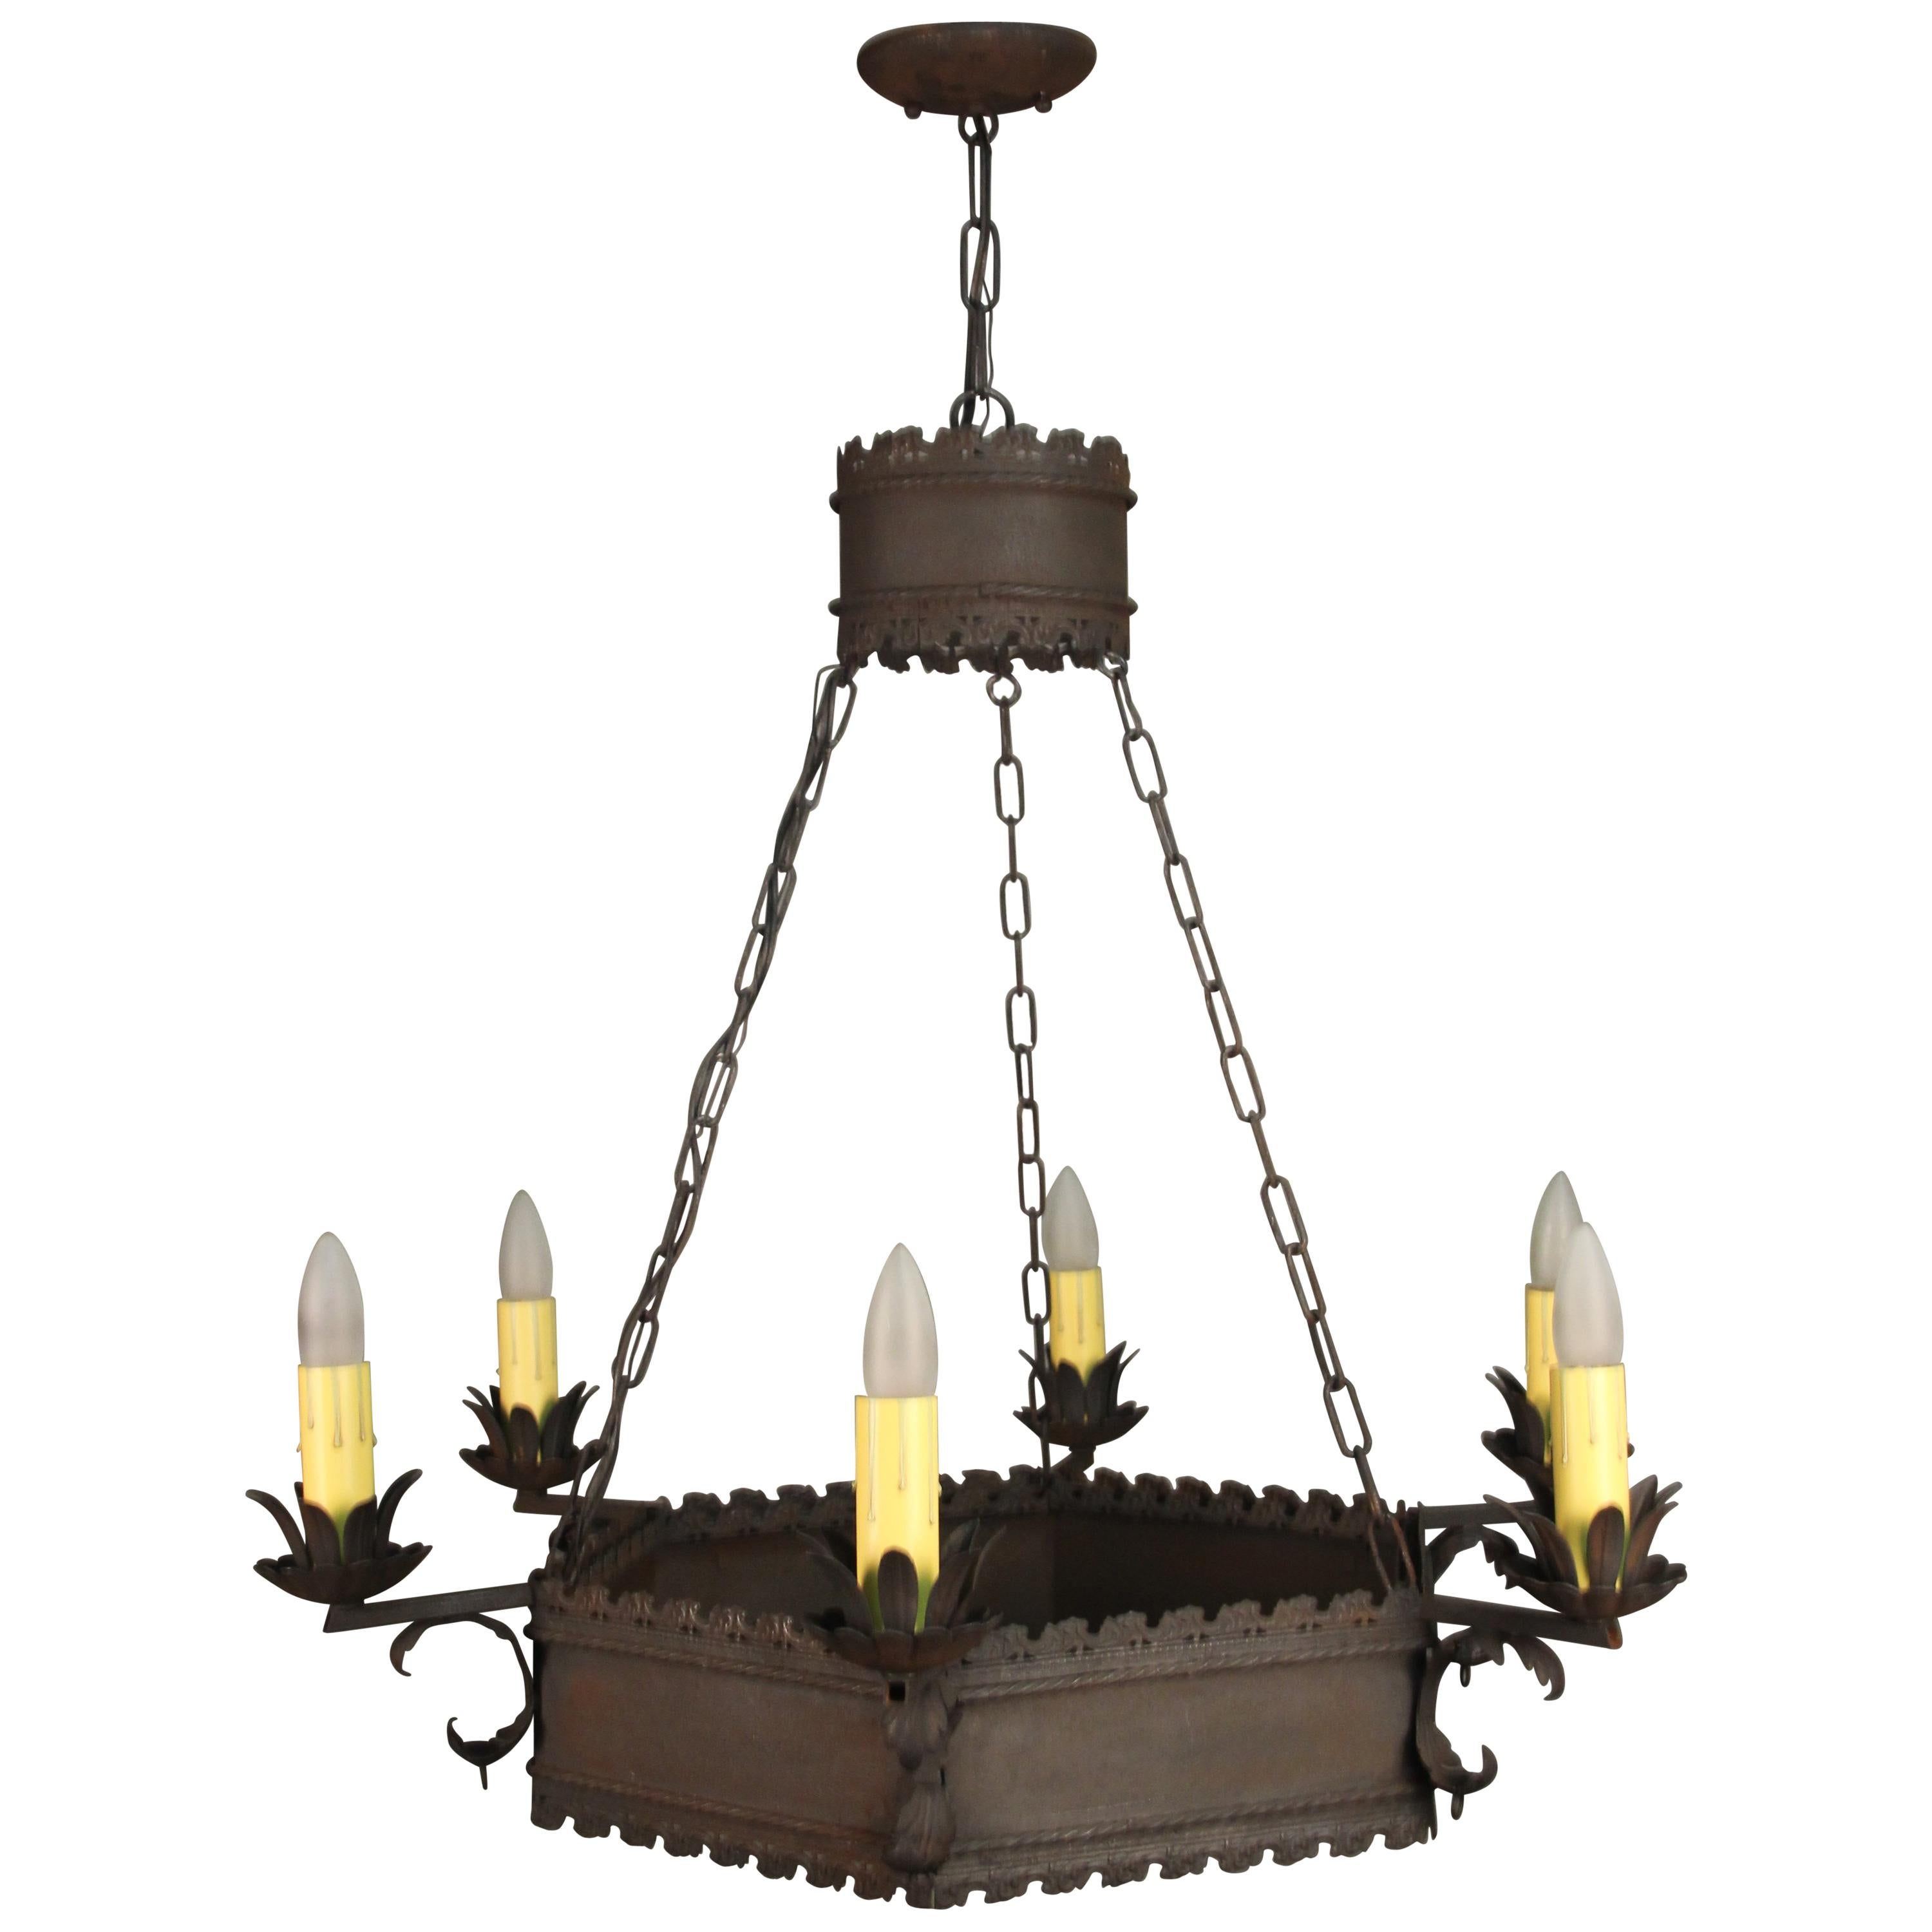 Larger Scale Spanish Revival Iron Chandelier For Sale